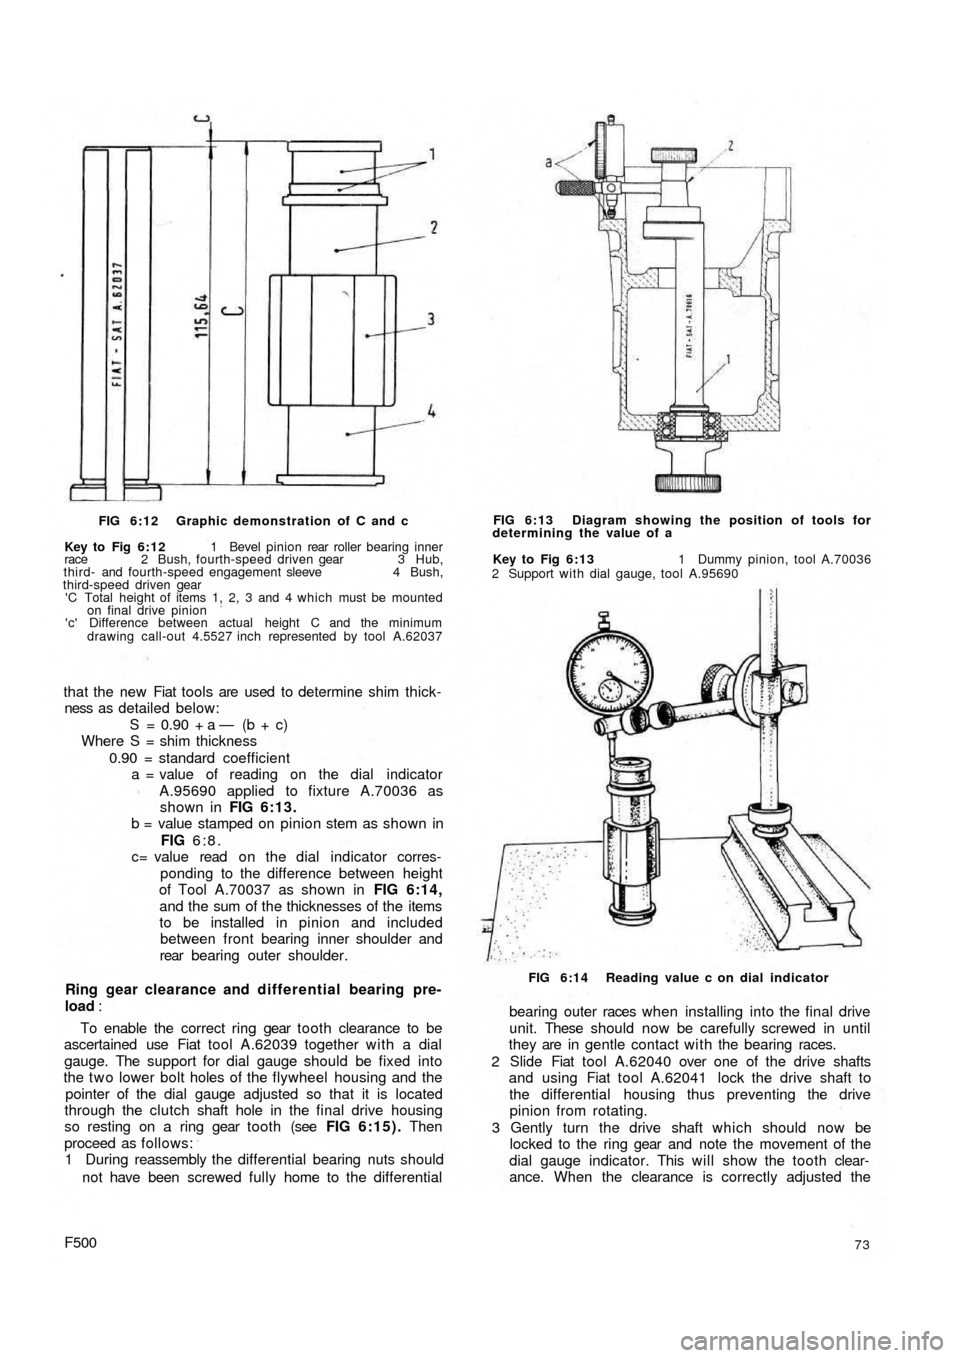 FIAT 500 1969 1.G Repair Manual FIG 6:12 Graphic demonstration  of C and c
Key to Fig 6:12 1 Bevel pinion rear roller bearing inner
race 2 Bush, fourth-speed driven gear 3 Hub,
third- and fourth-speed engagement sleeve 4 Bush,
third